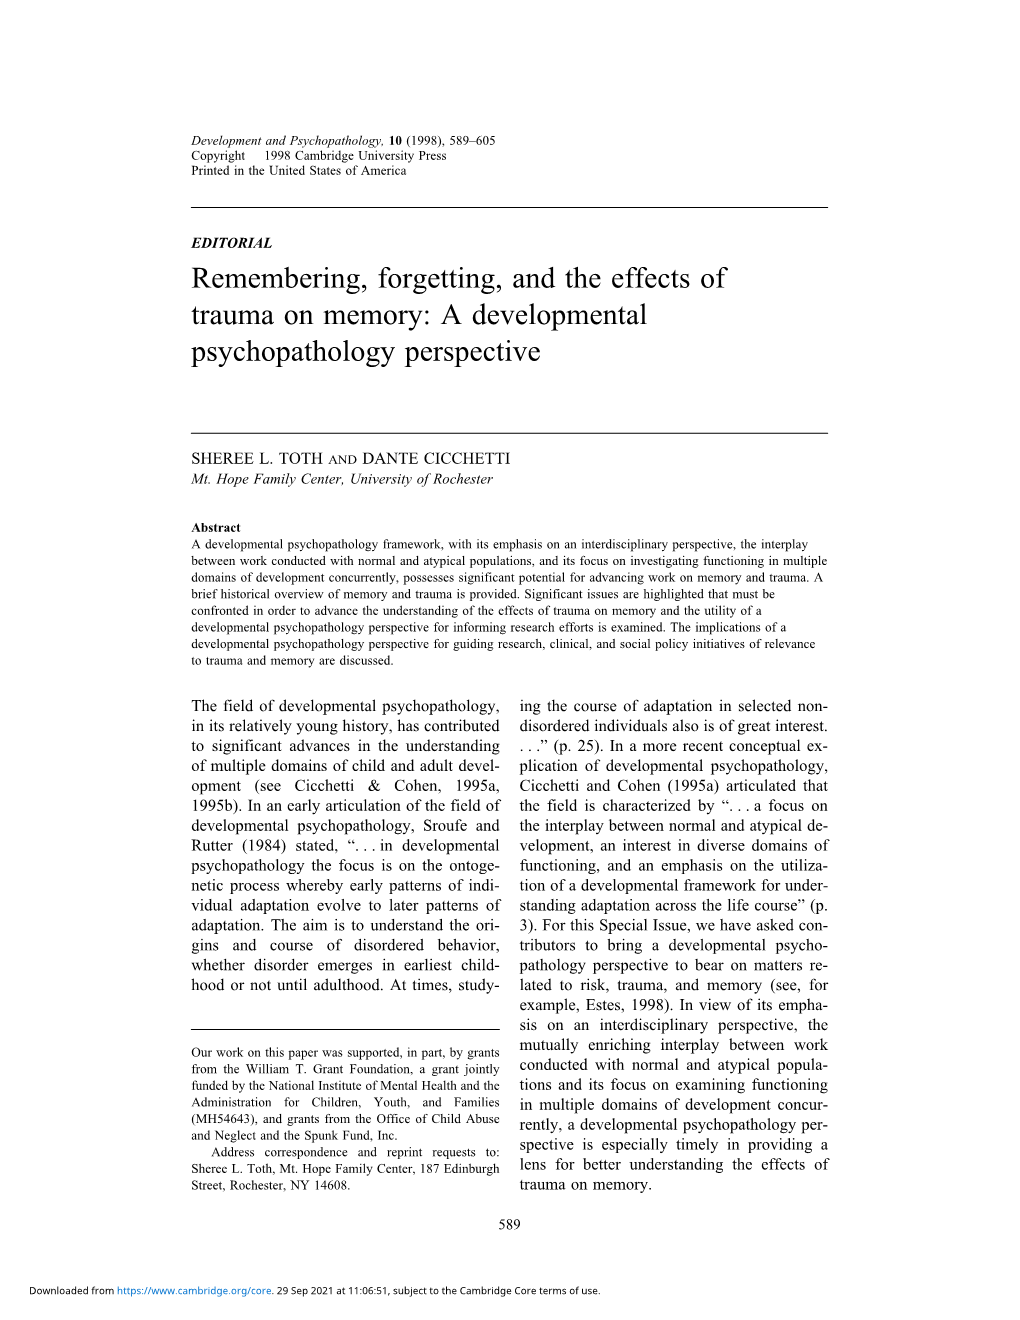 Remembering, Forgetting, and the Effects of Trauma on Memory: a Developmental Psychopathology Perspective